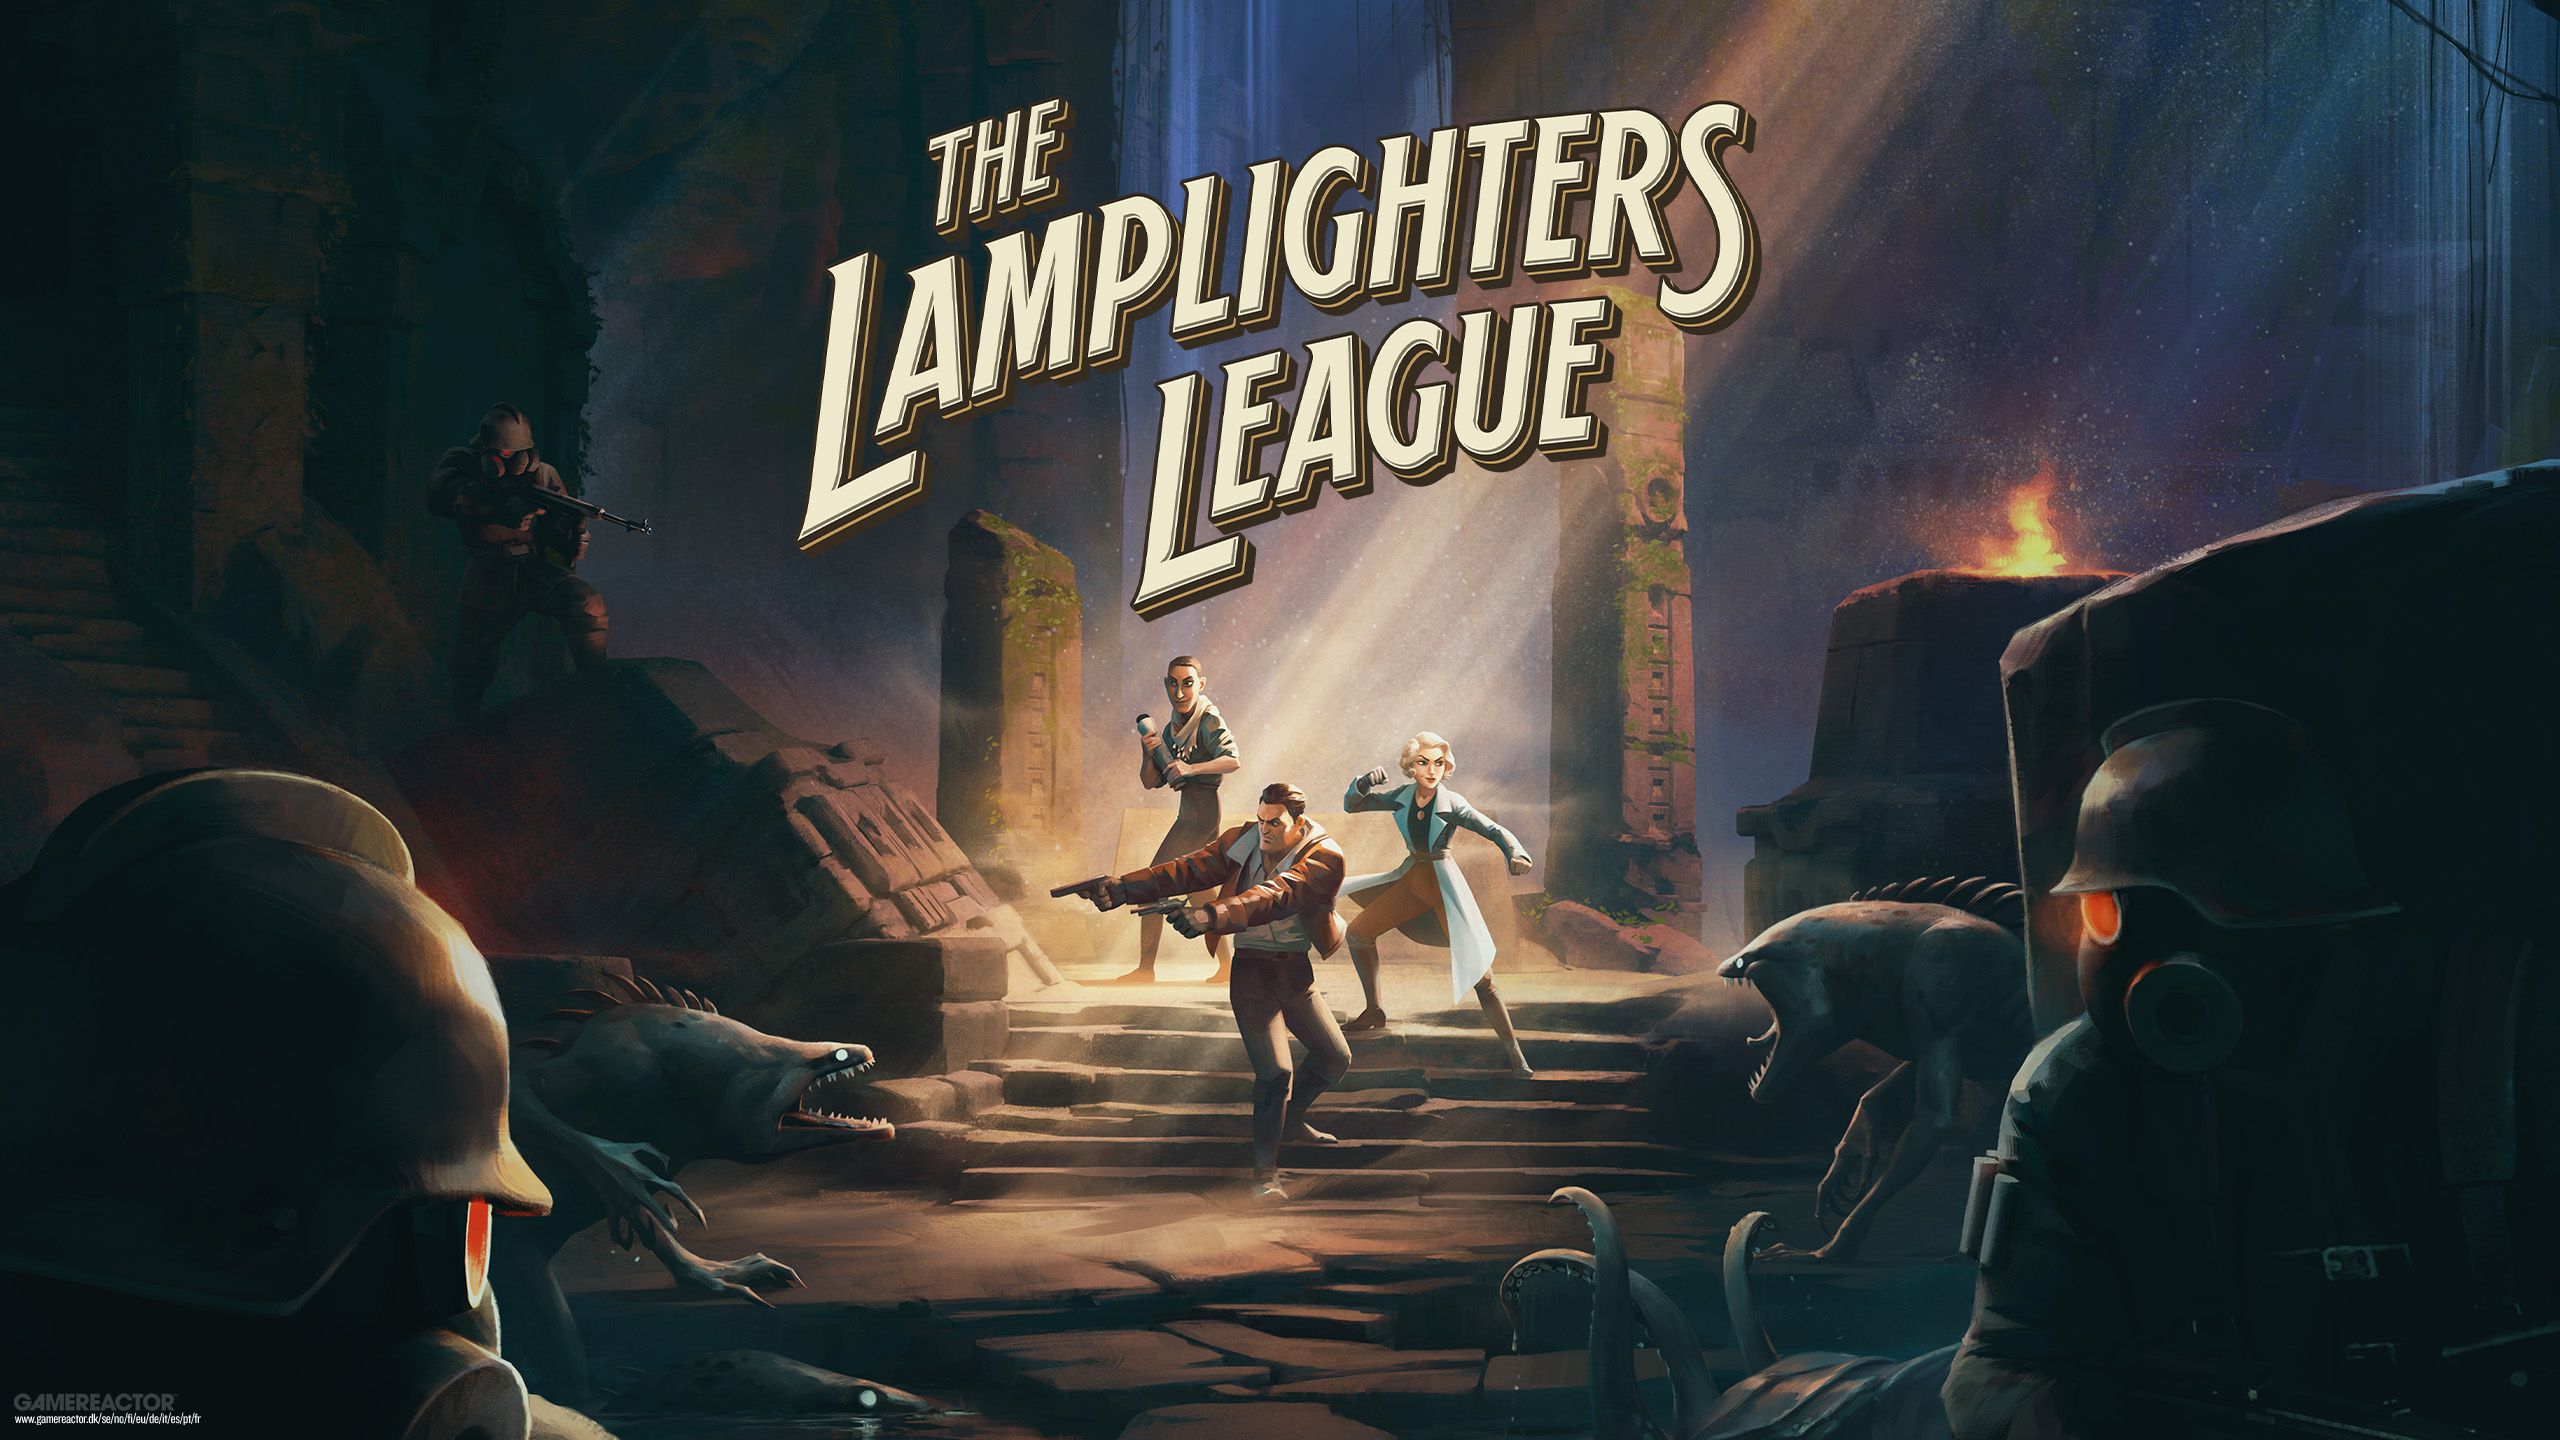 The Lamplighters League is coming to PC and Xbox this year